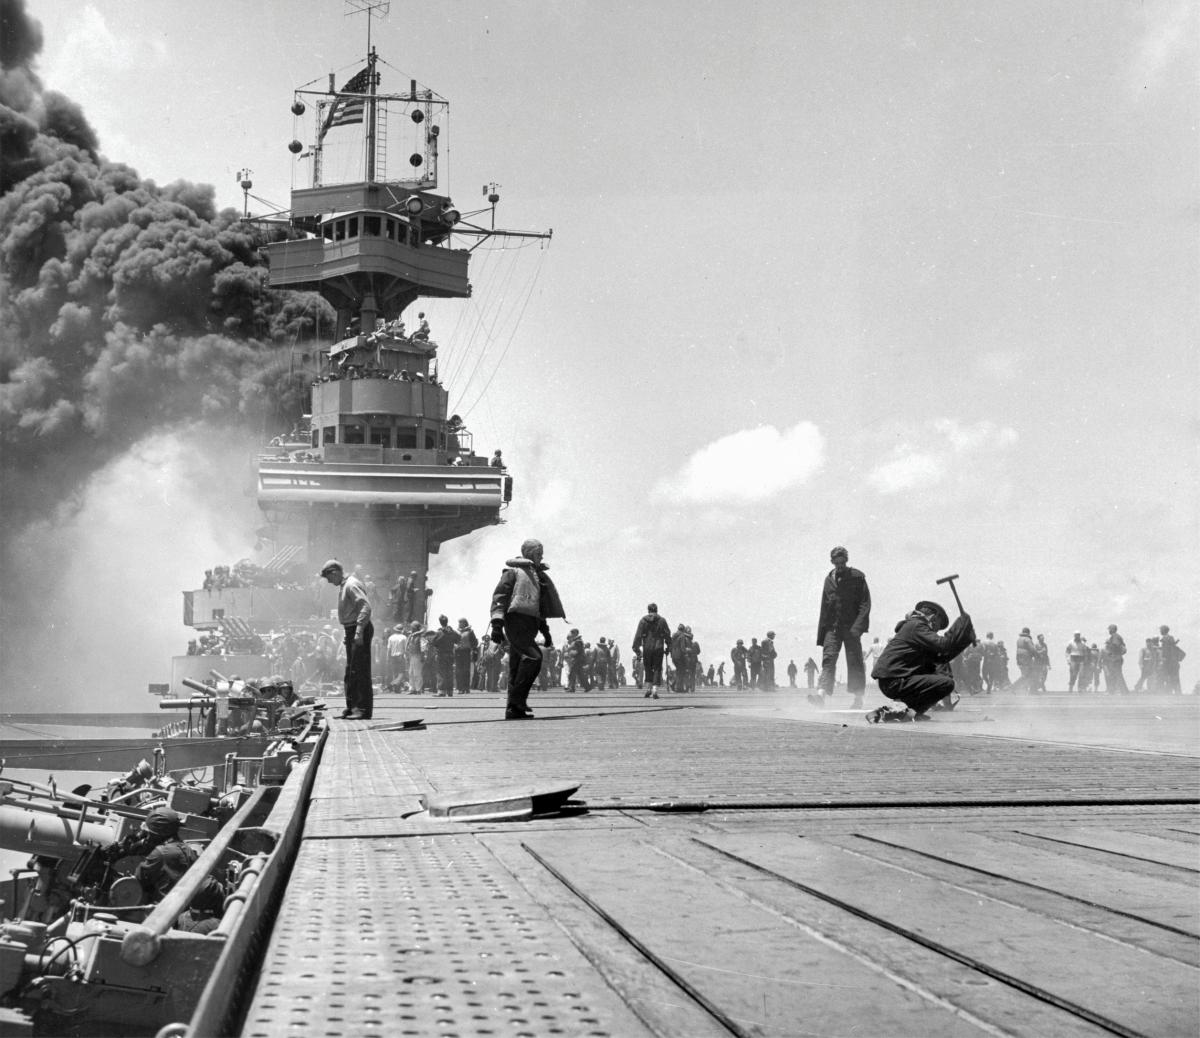  Crewmen repair bomb damage to the flight deck of the USS Yorktown (CV-5) on 4 June 1942 during the Battle of Midway